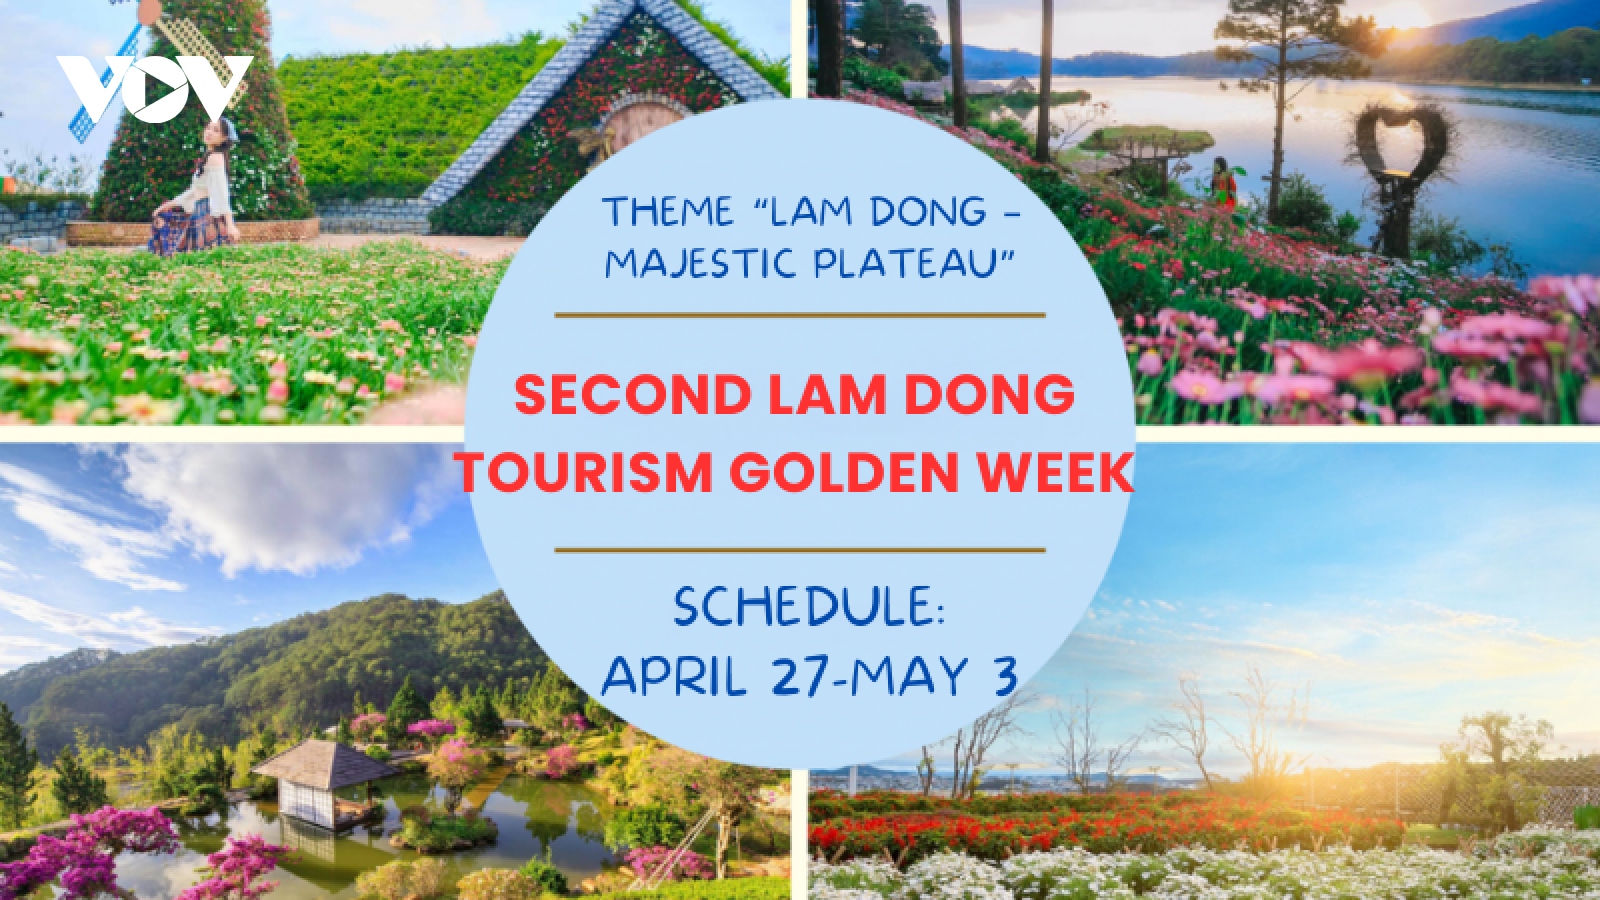 Lam Dong Tourism Week offers enjoyable experiences